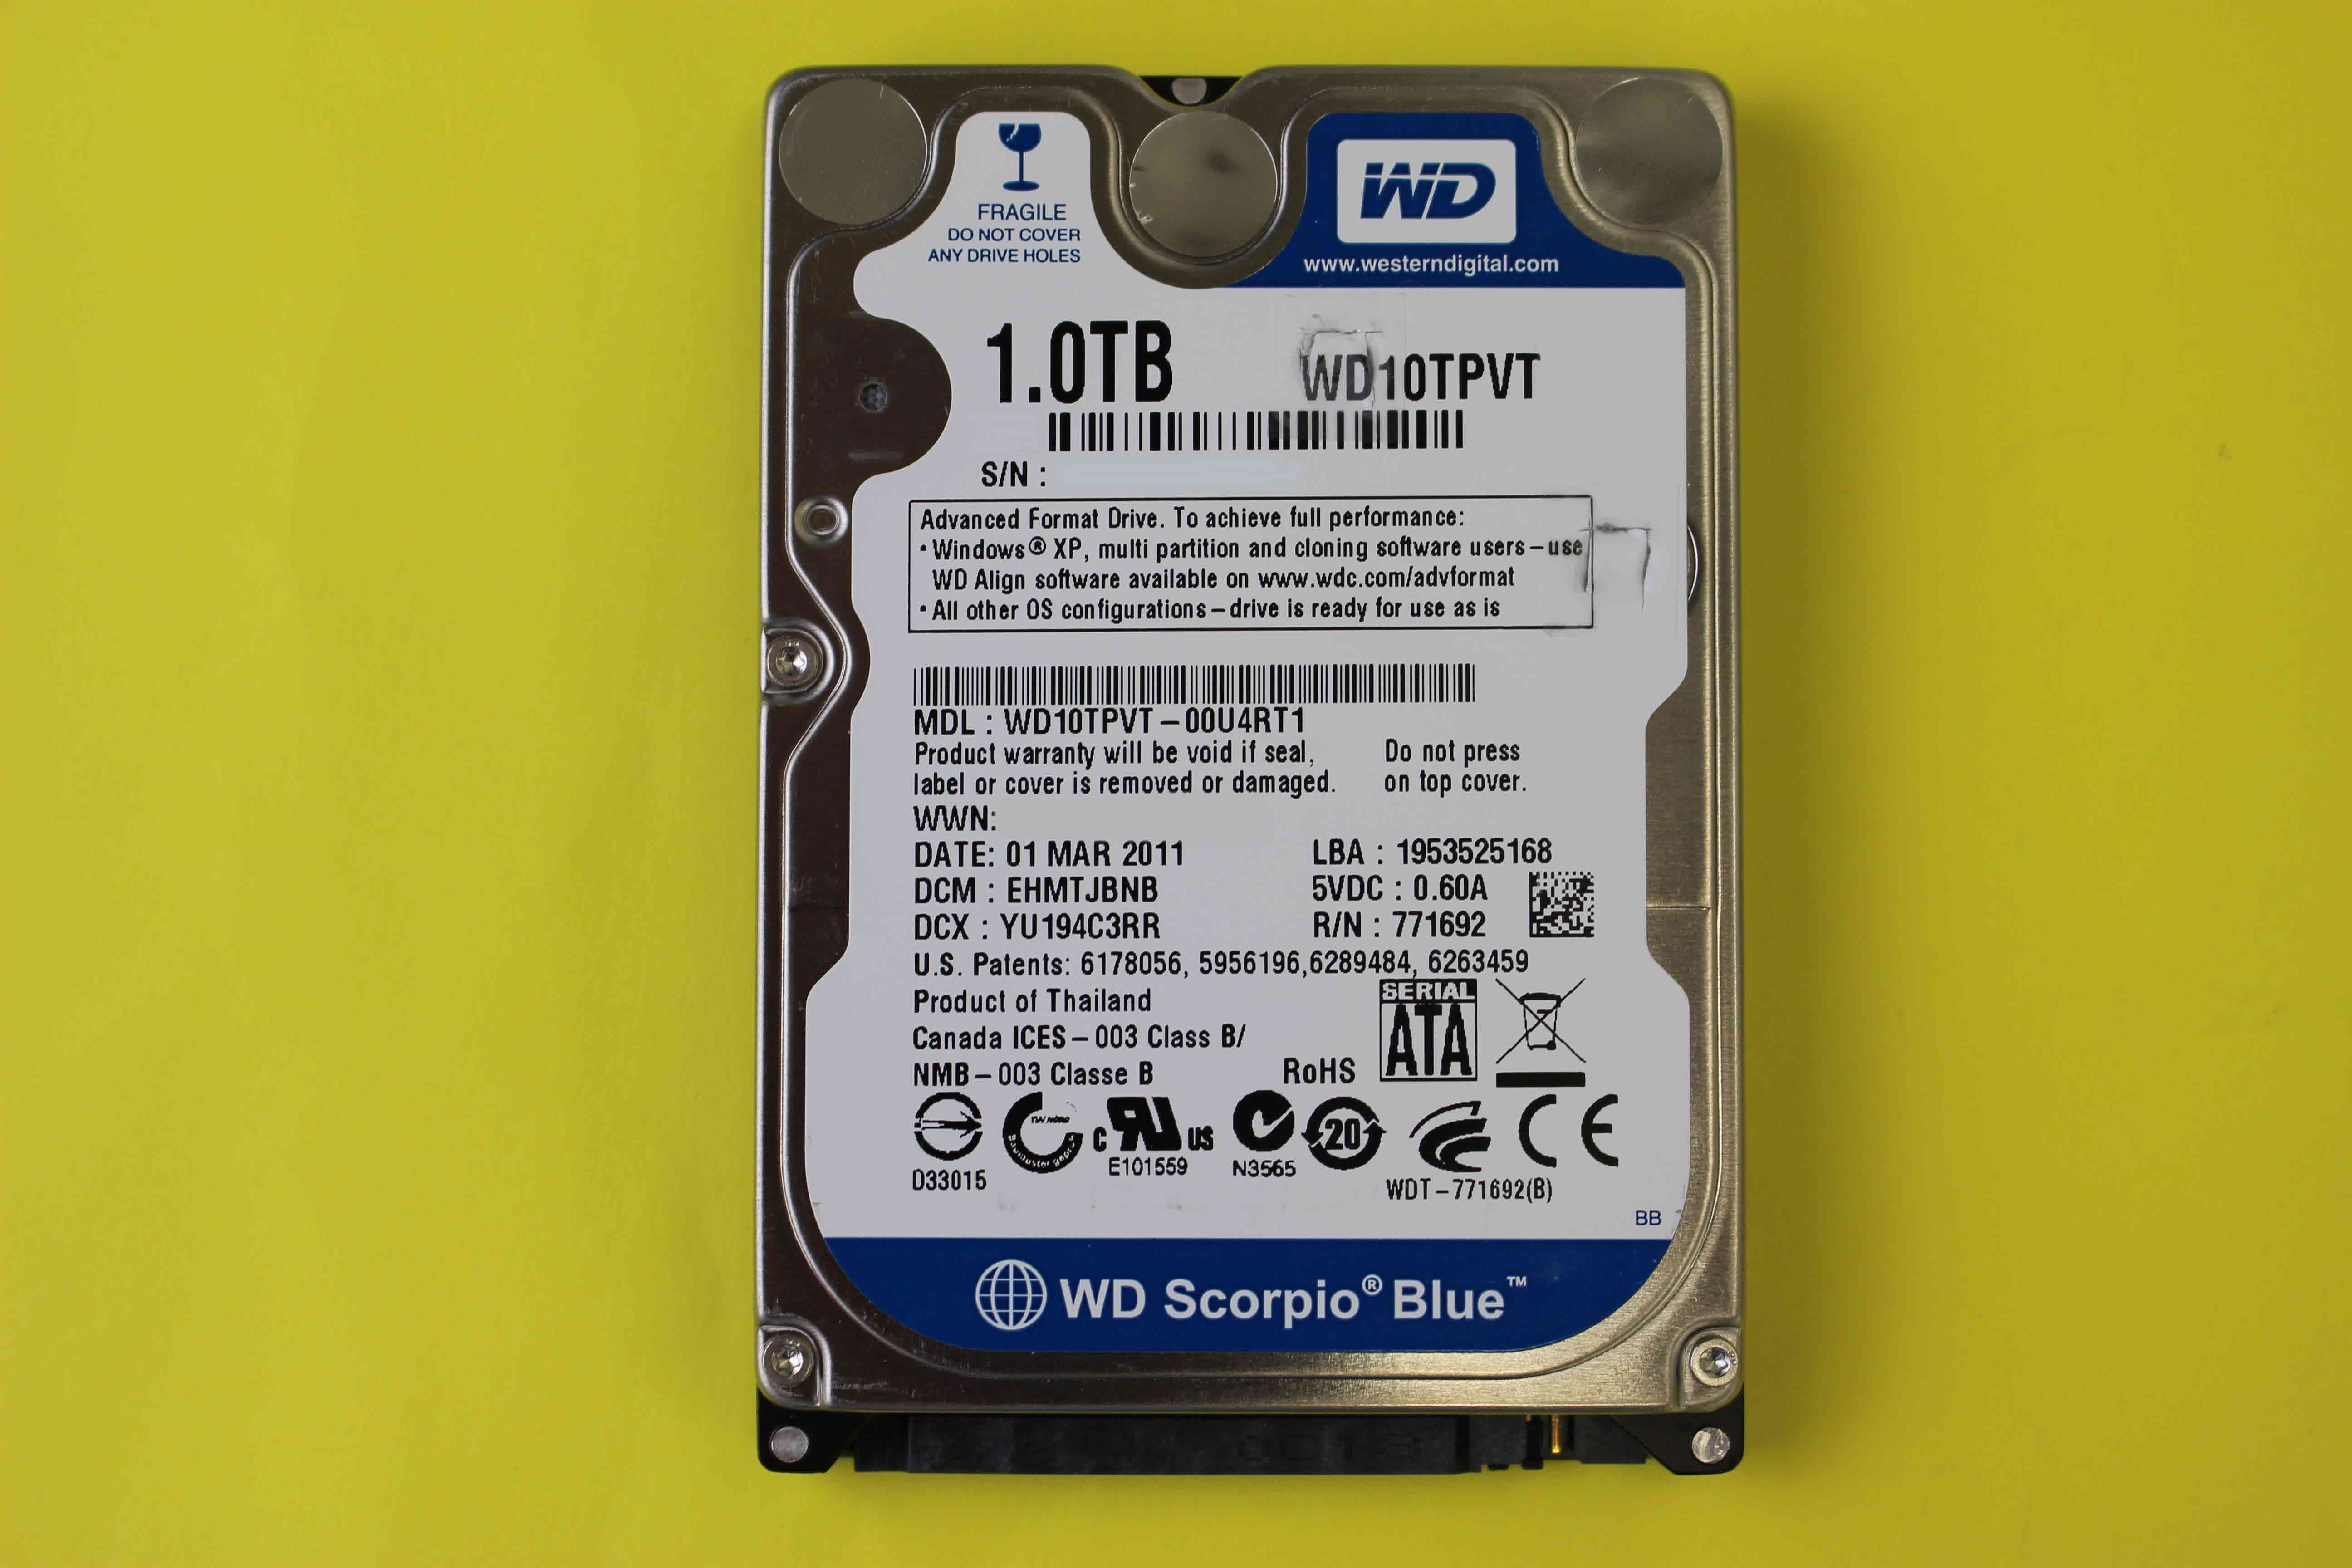 wd10tpvt-00u4rt1-recovery